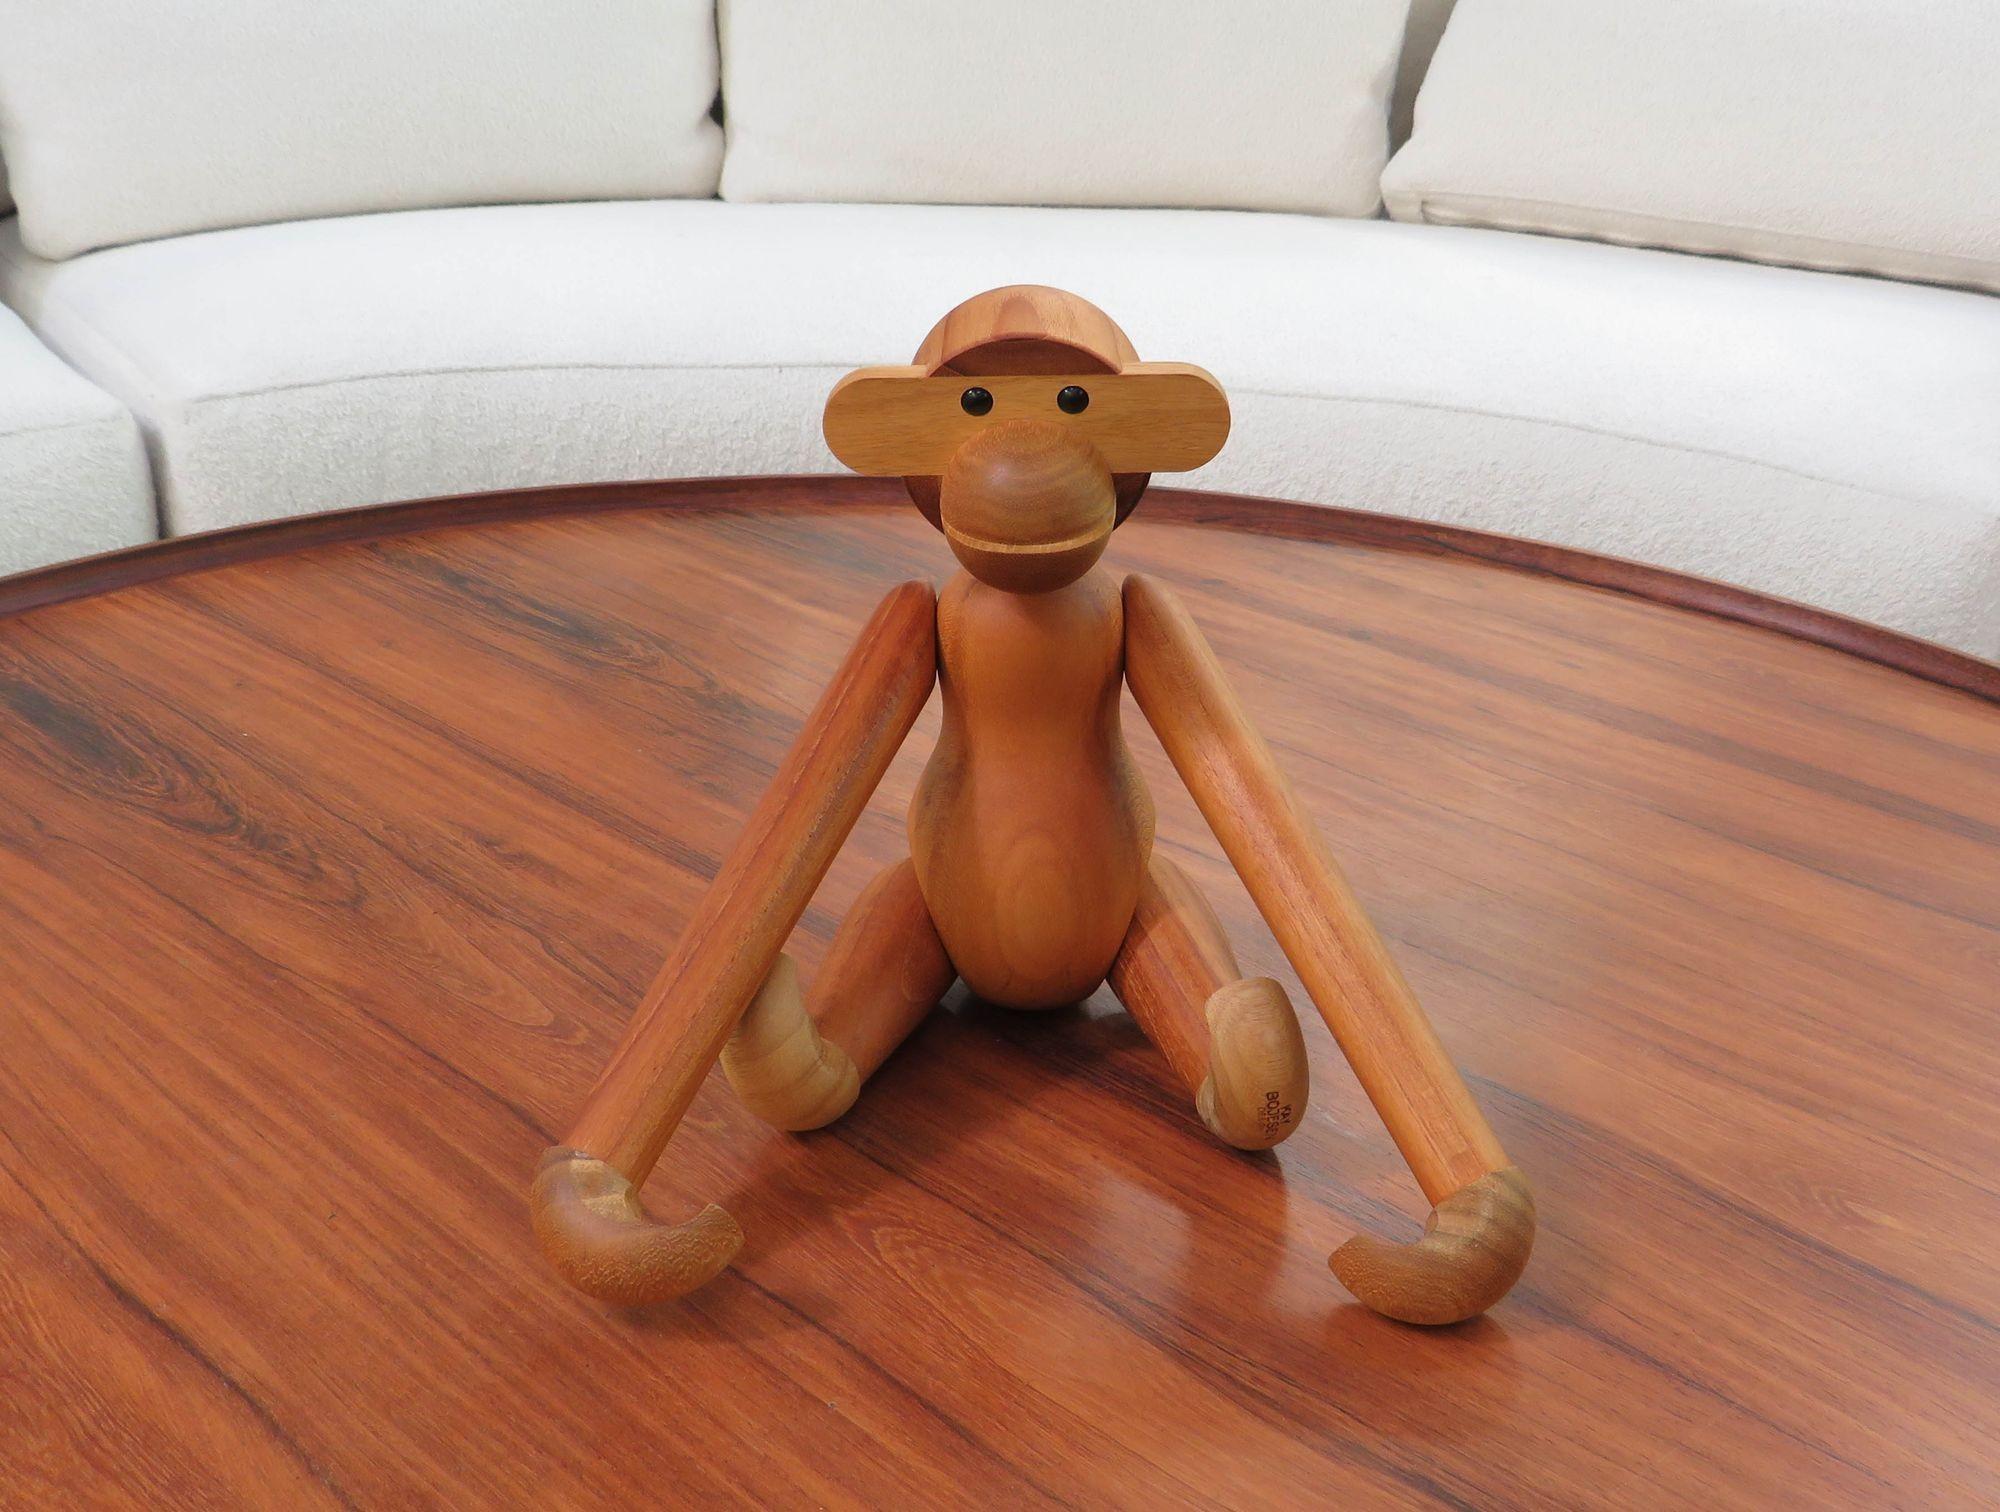 Original Kay Bojesen wooden monkey, designed in 1951, Denmark. This iconic danish toy is sculpted from solid teak and limba wood, it showcases segmented limbs and movable head, arms, and legs. Stamped